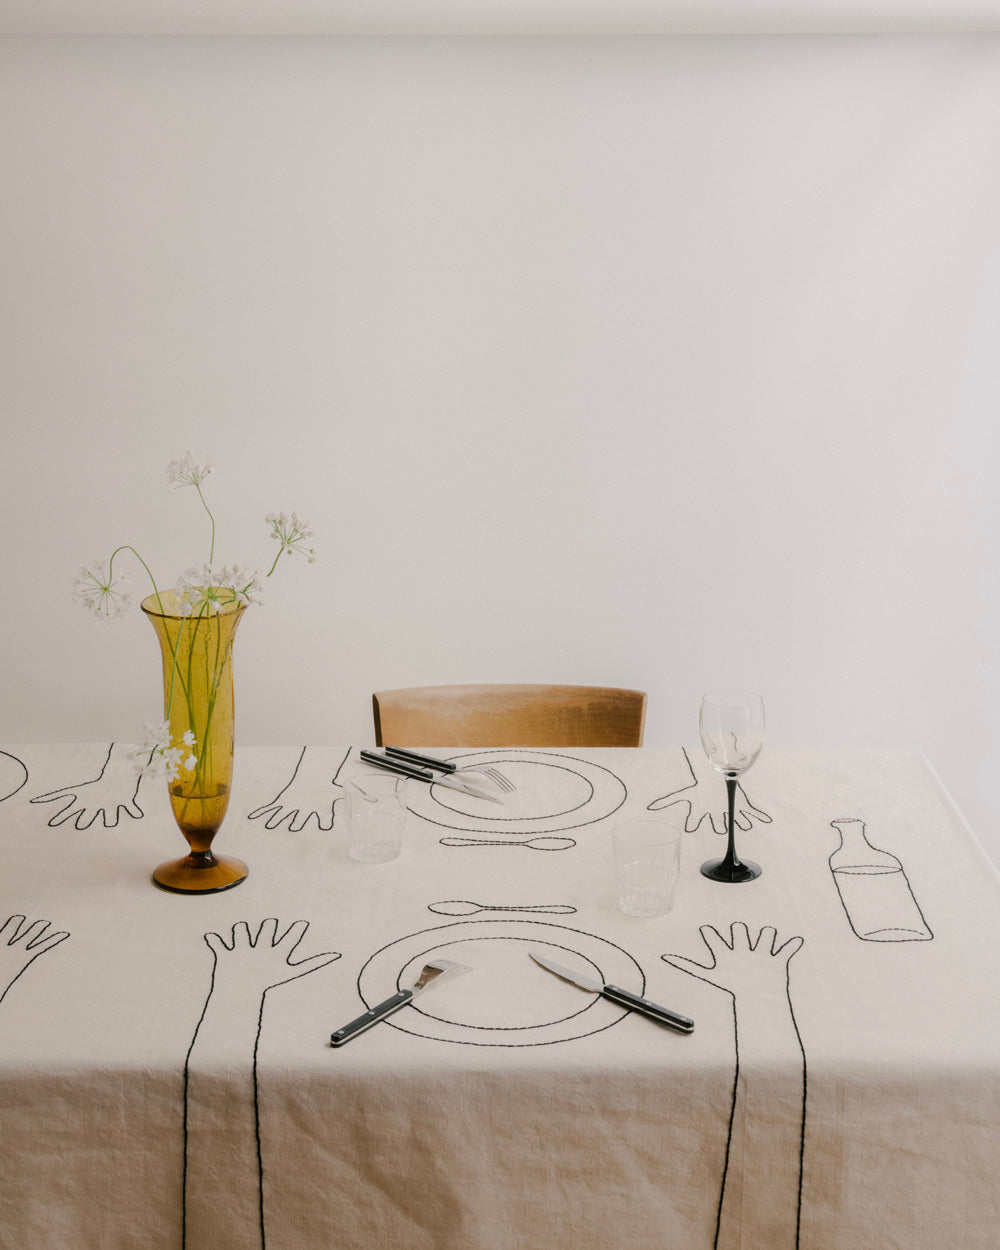 tablecloth drawing